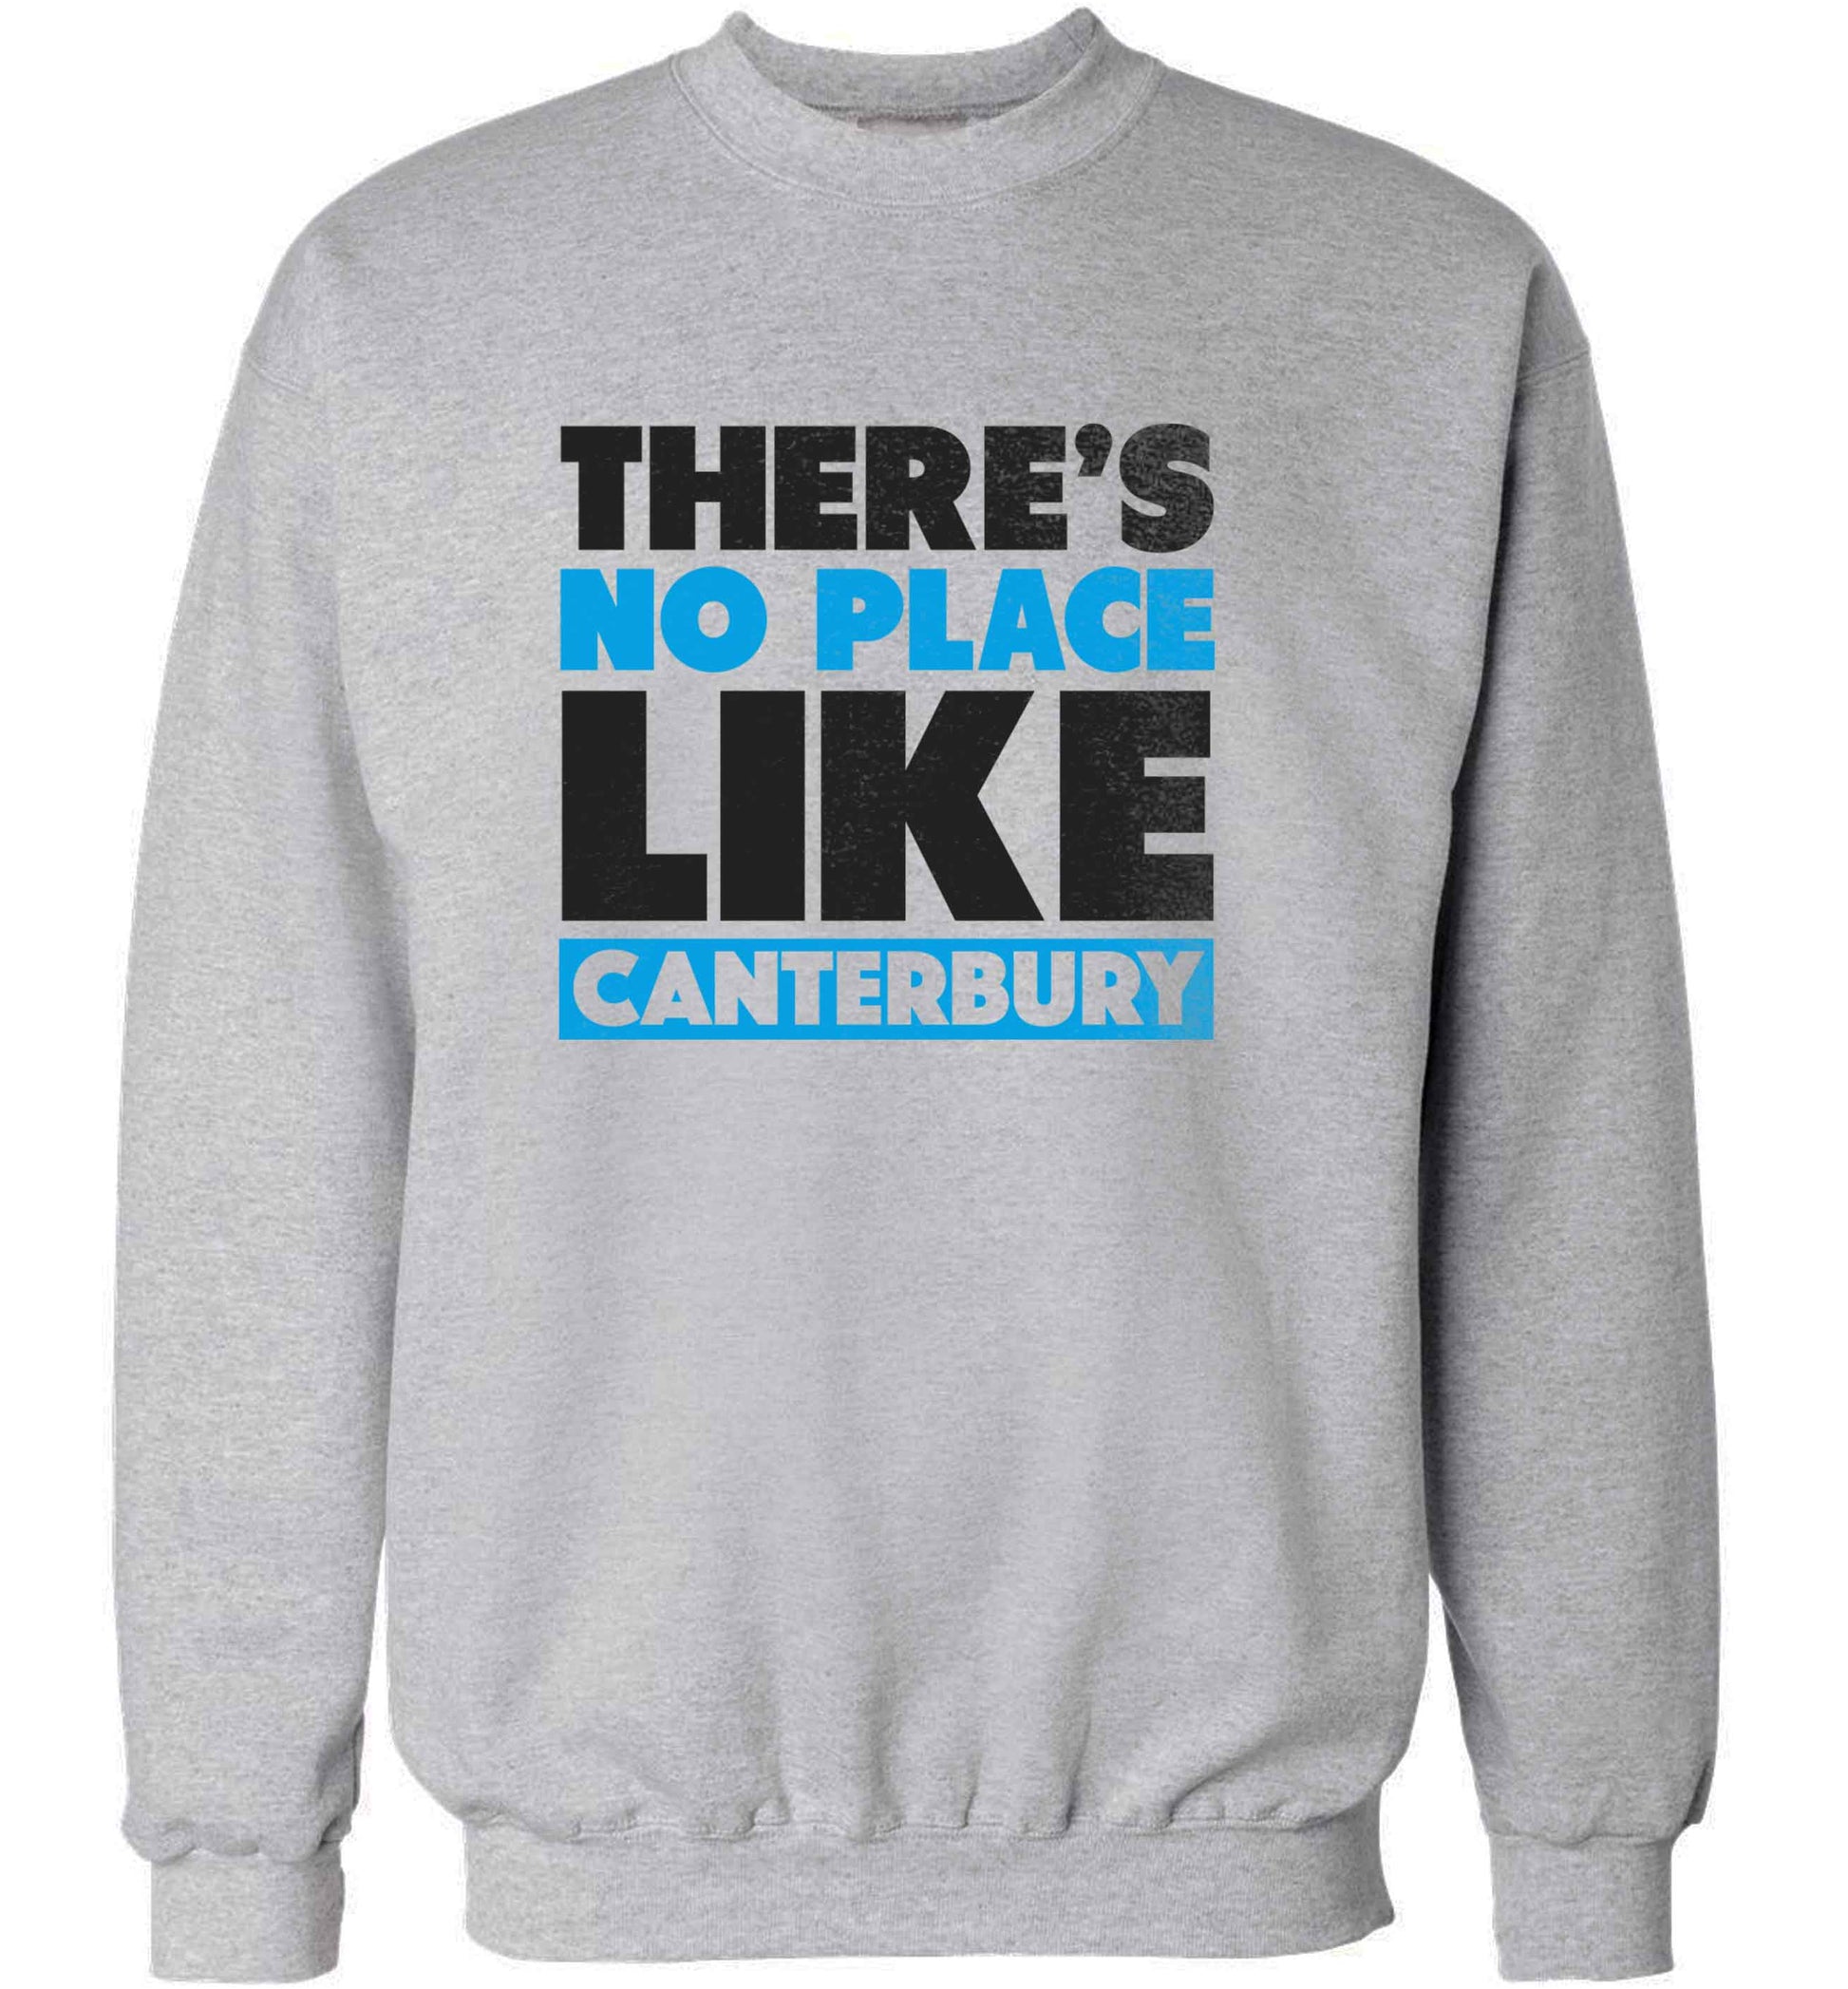 There's no place like Canterbury adult's unisex grey sweater 2XL